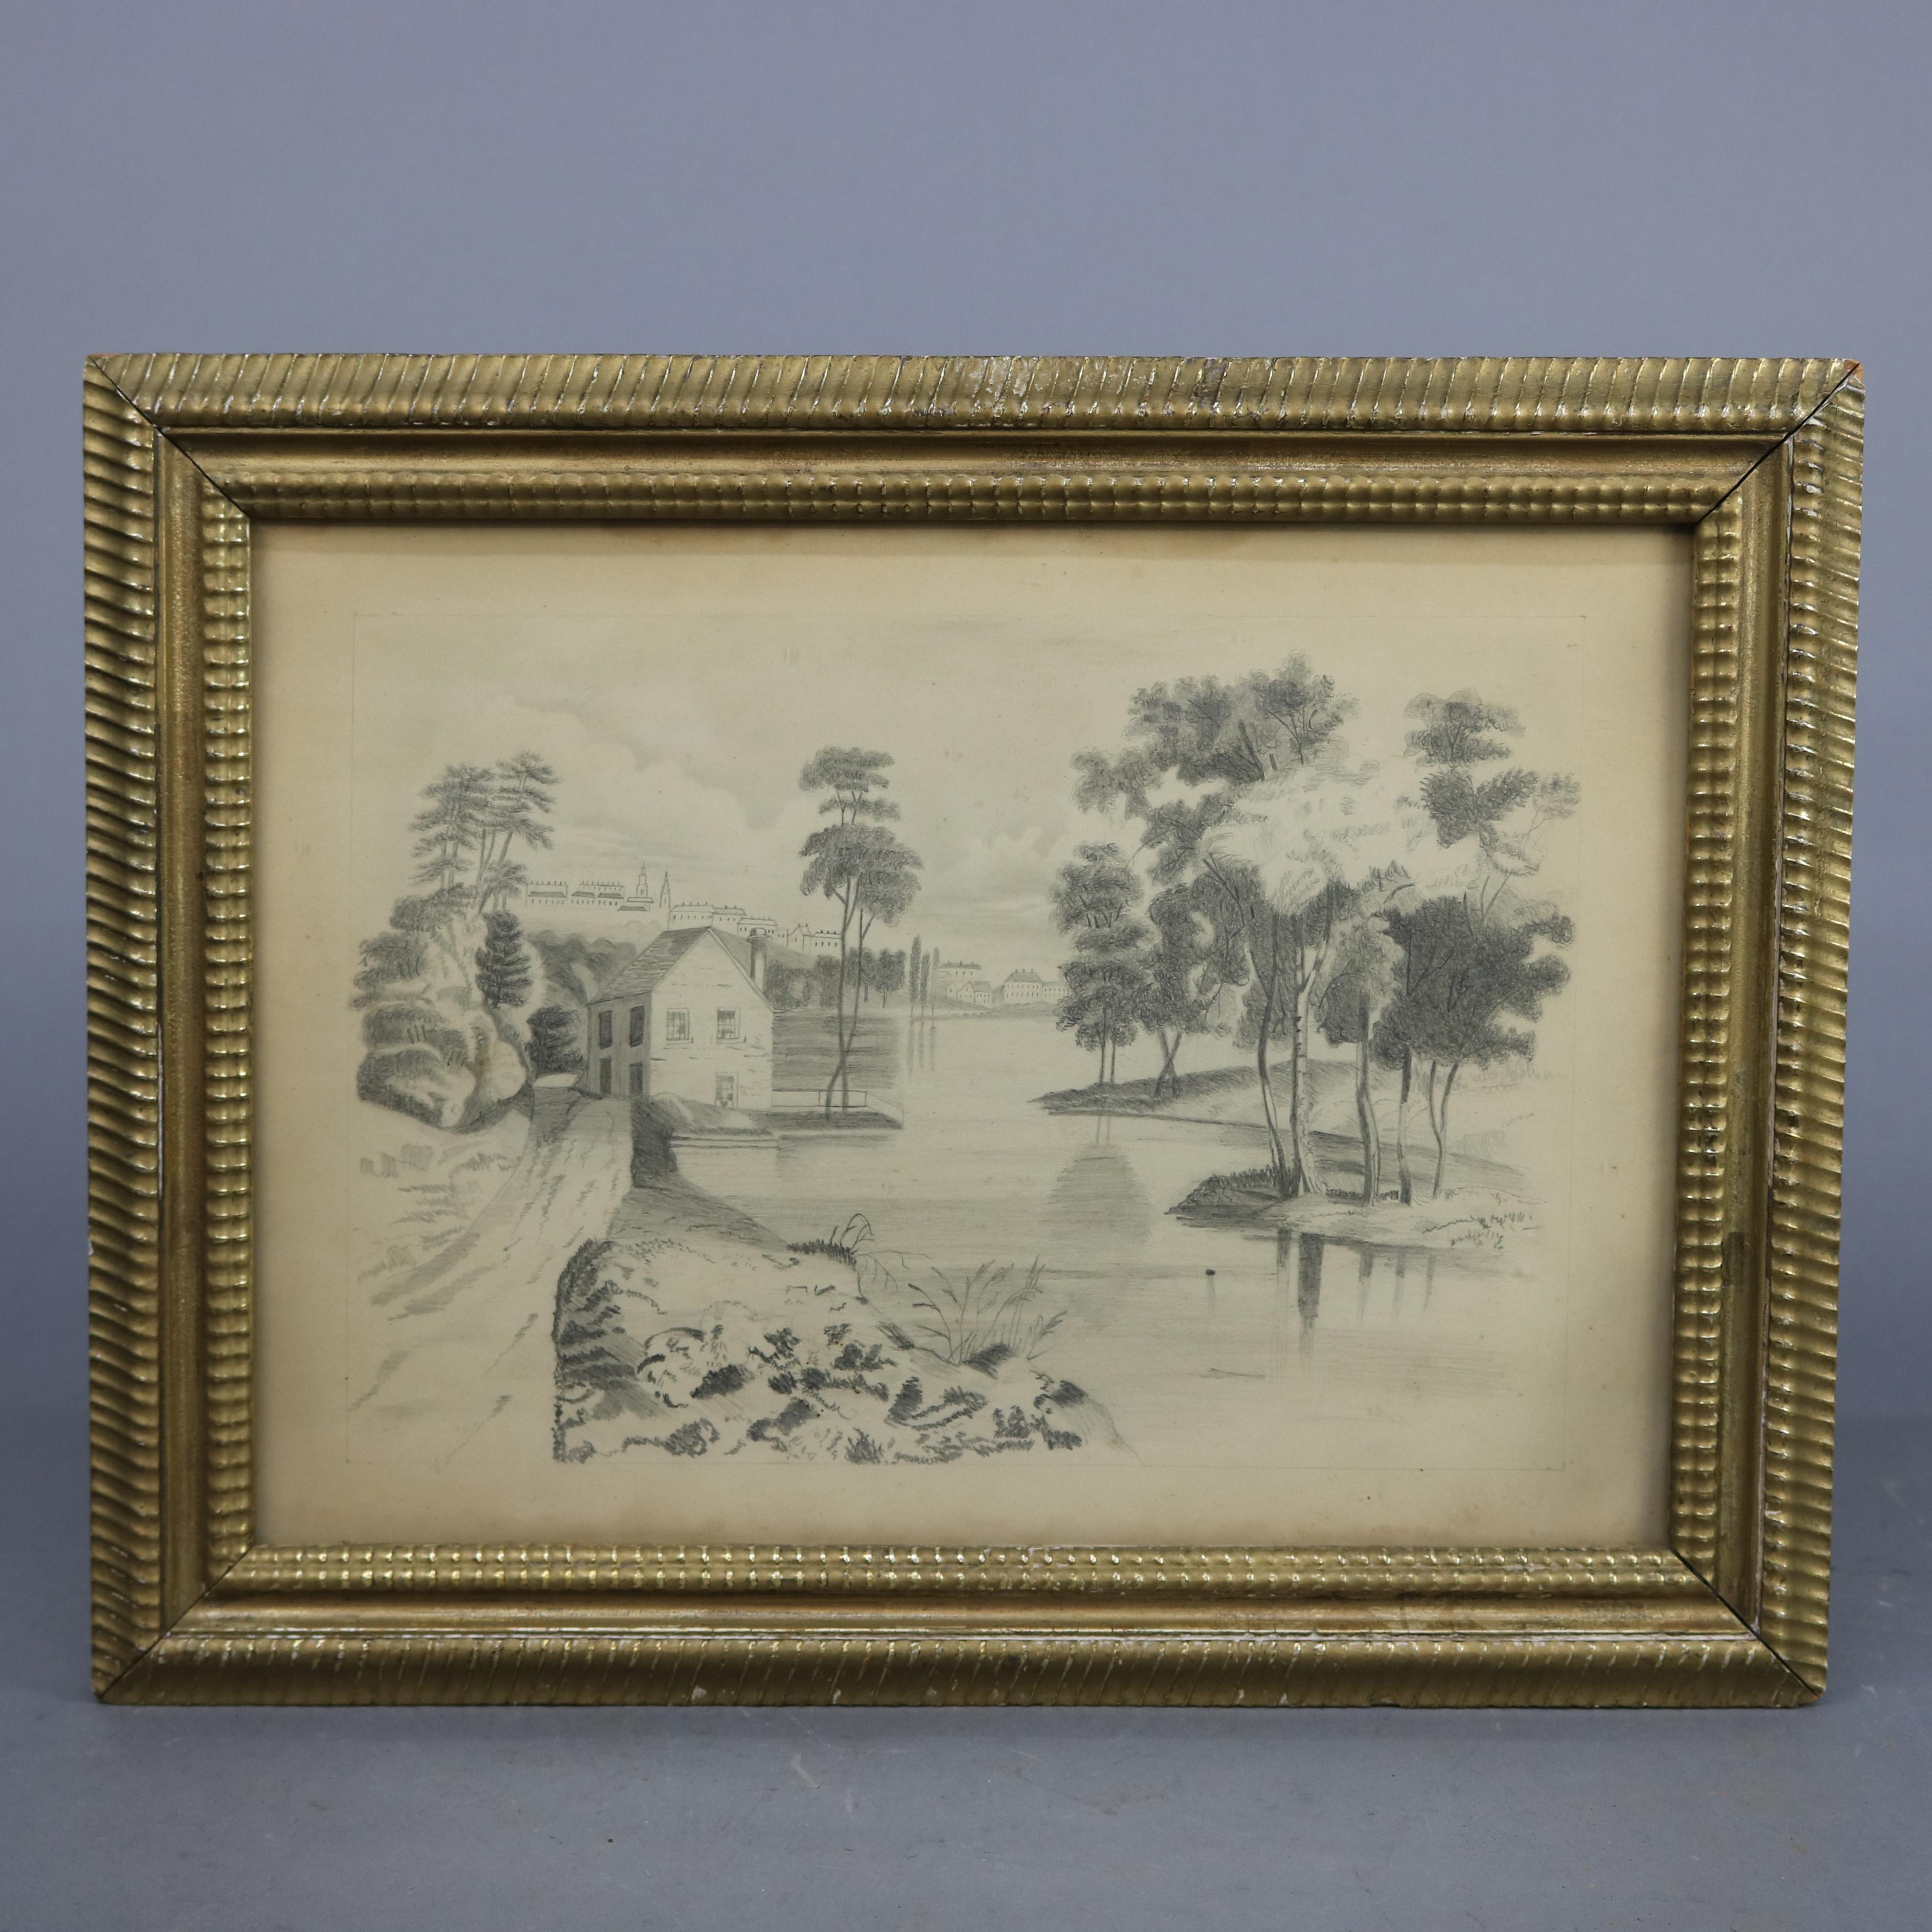 Carved Early Landscape Pencil Drawing in Original Frame, c1880